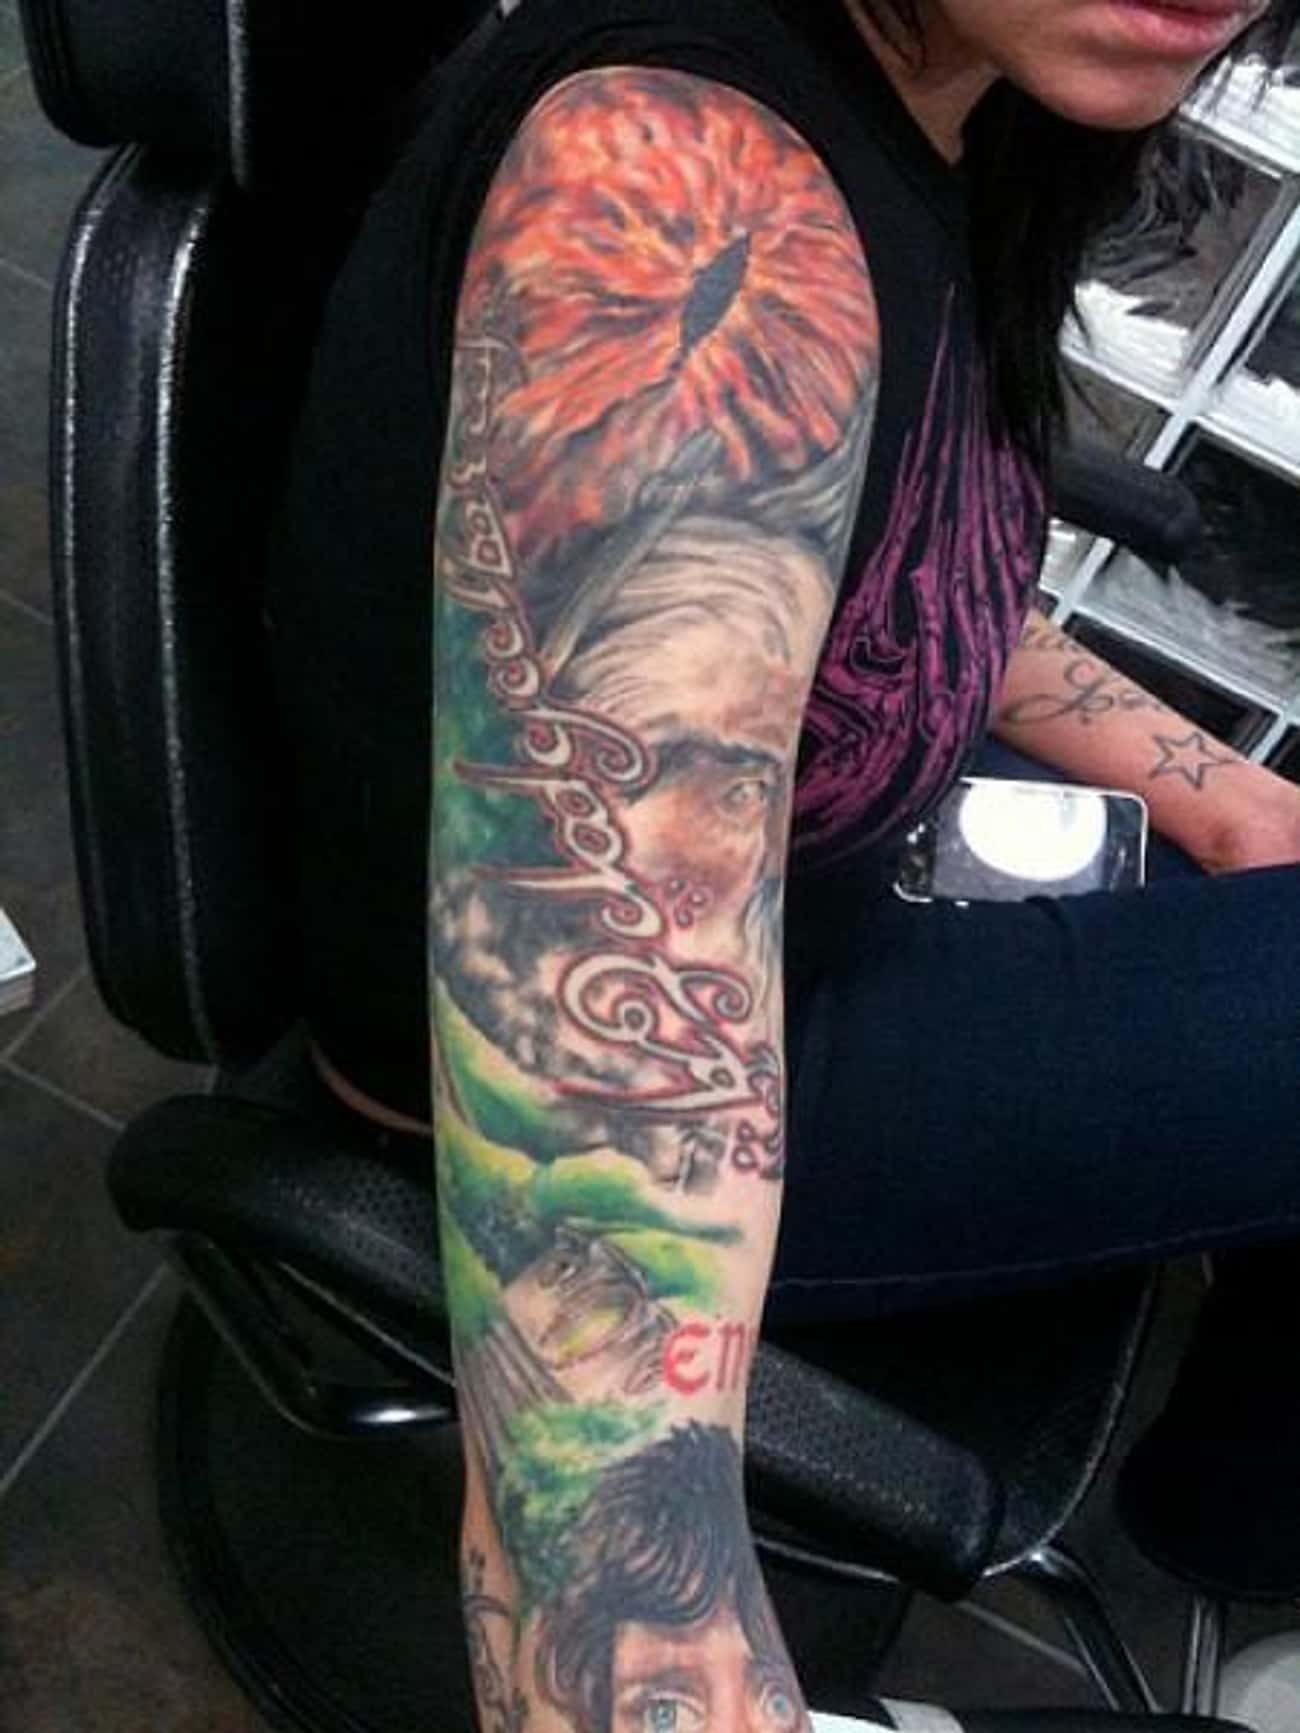 This Sleeve Is the Extended Edition of Tattoos